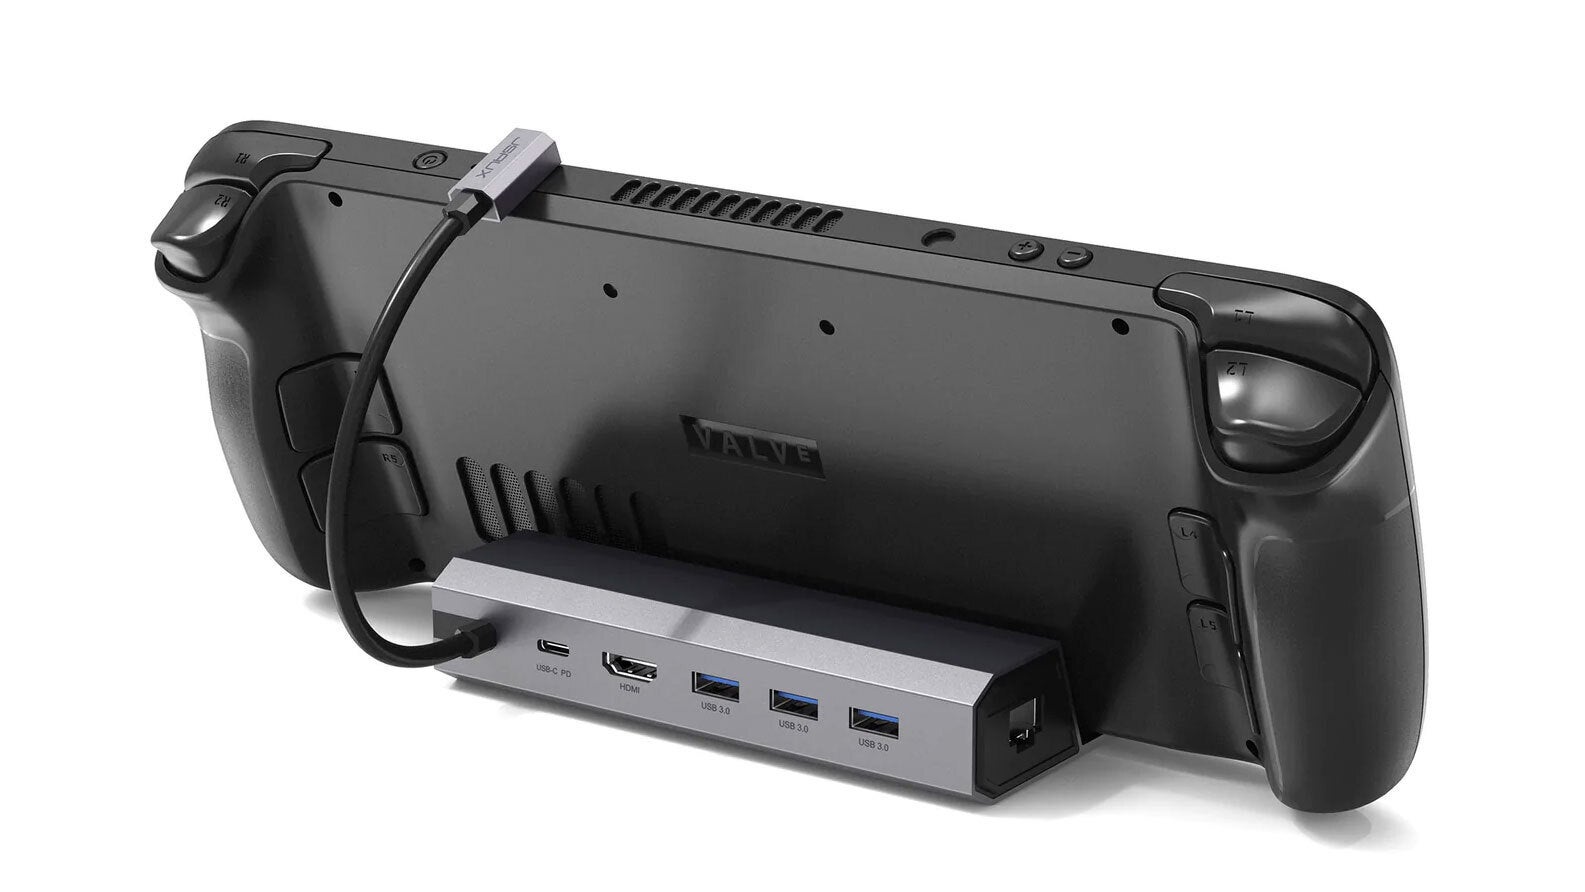 JSAUX's 6-in-1 dock that's compatible with the Steam Deck.